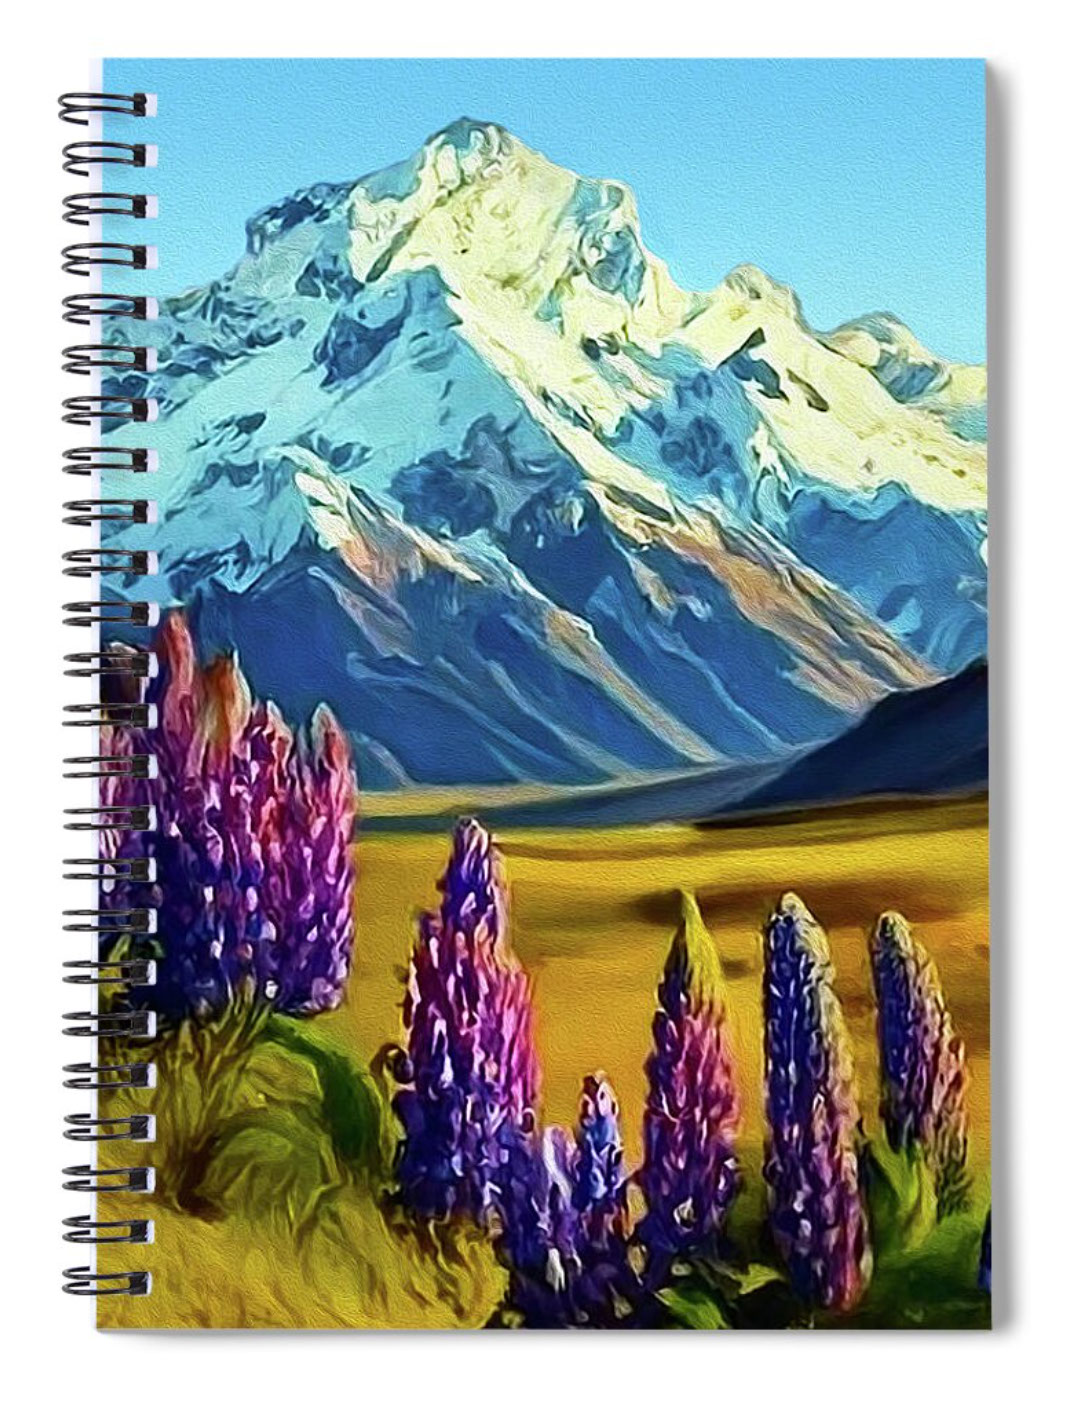 Aoraki with Lupins 1 rendition image